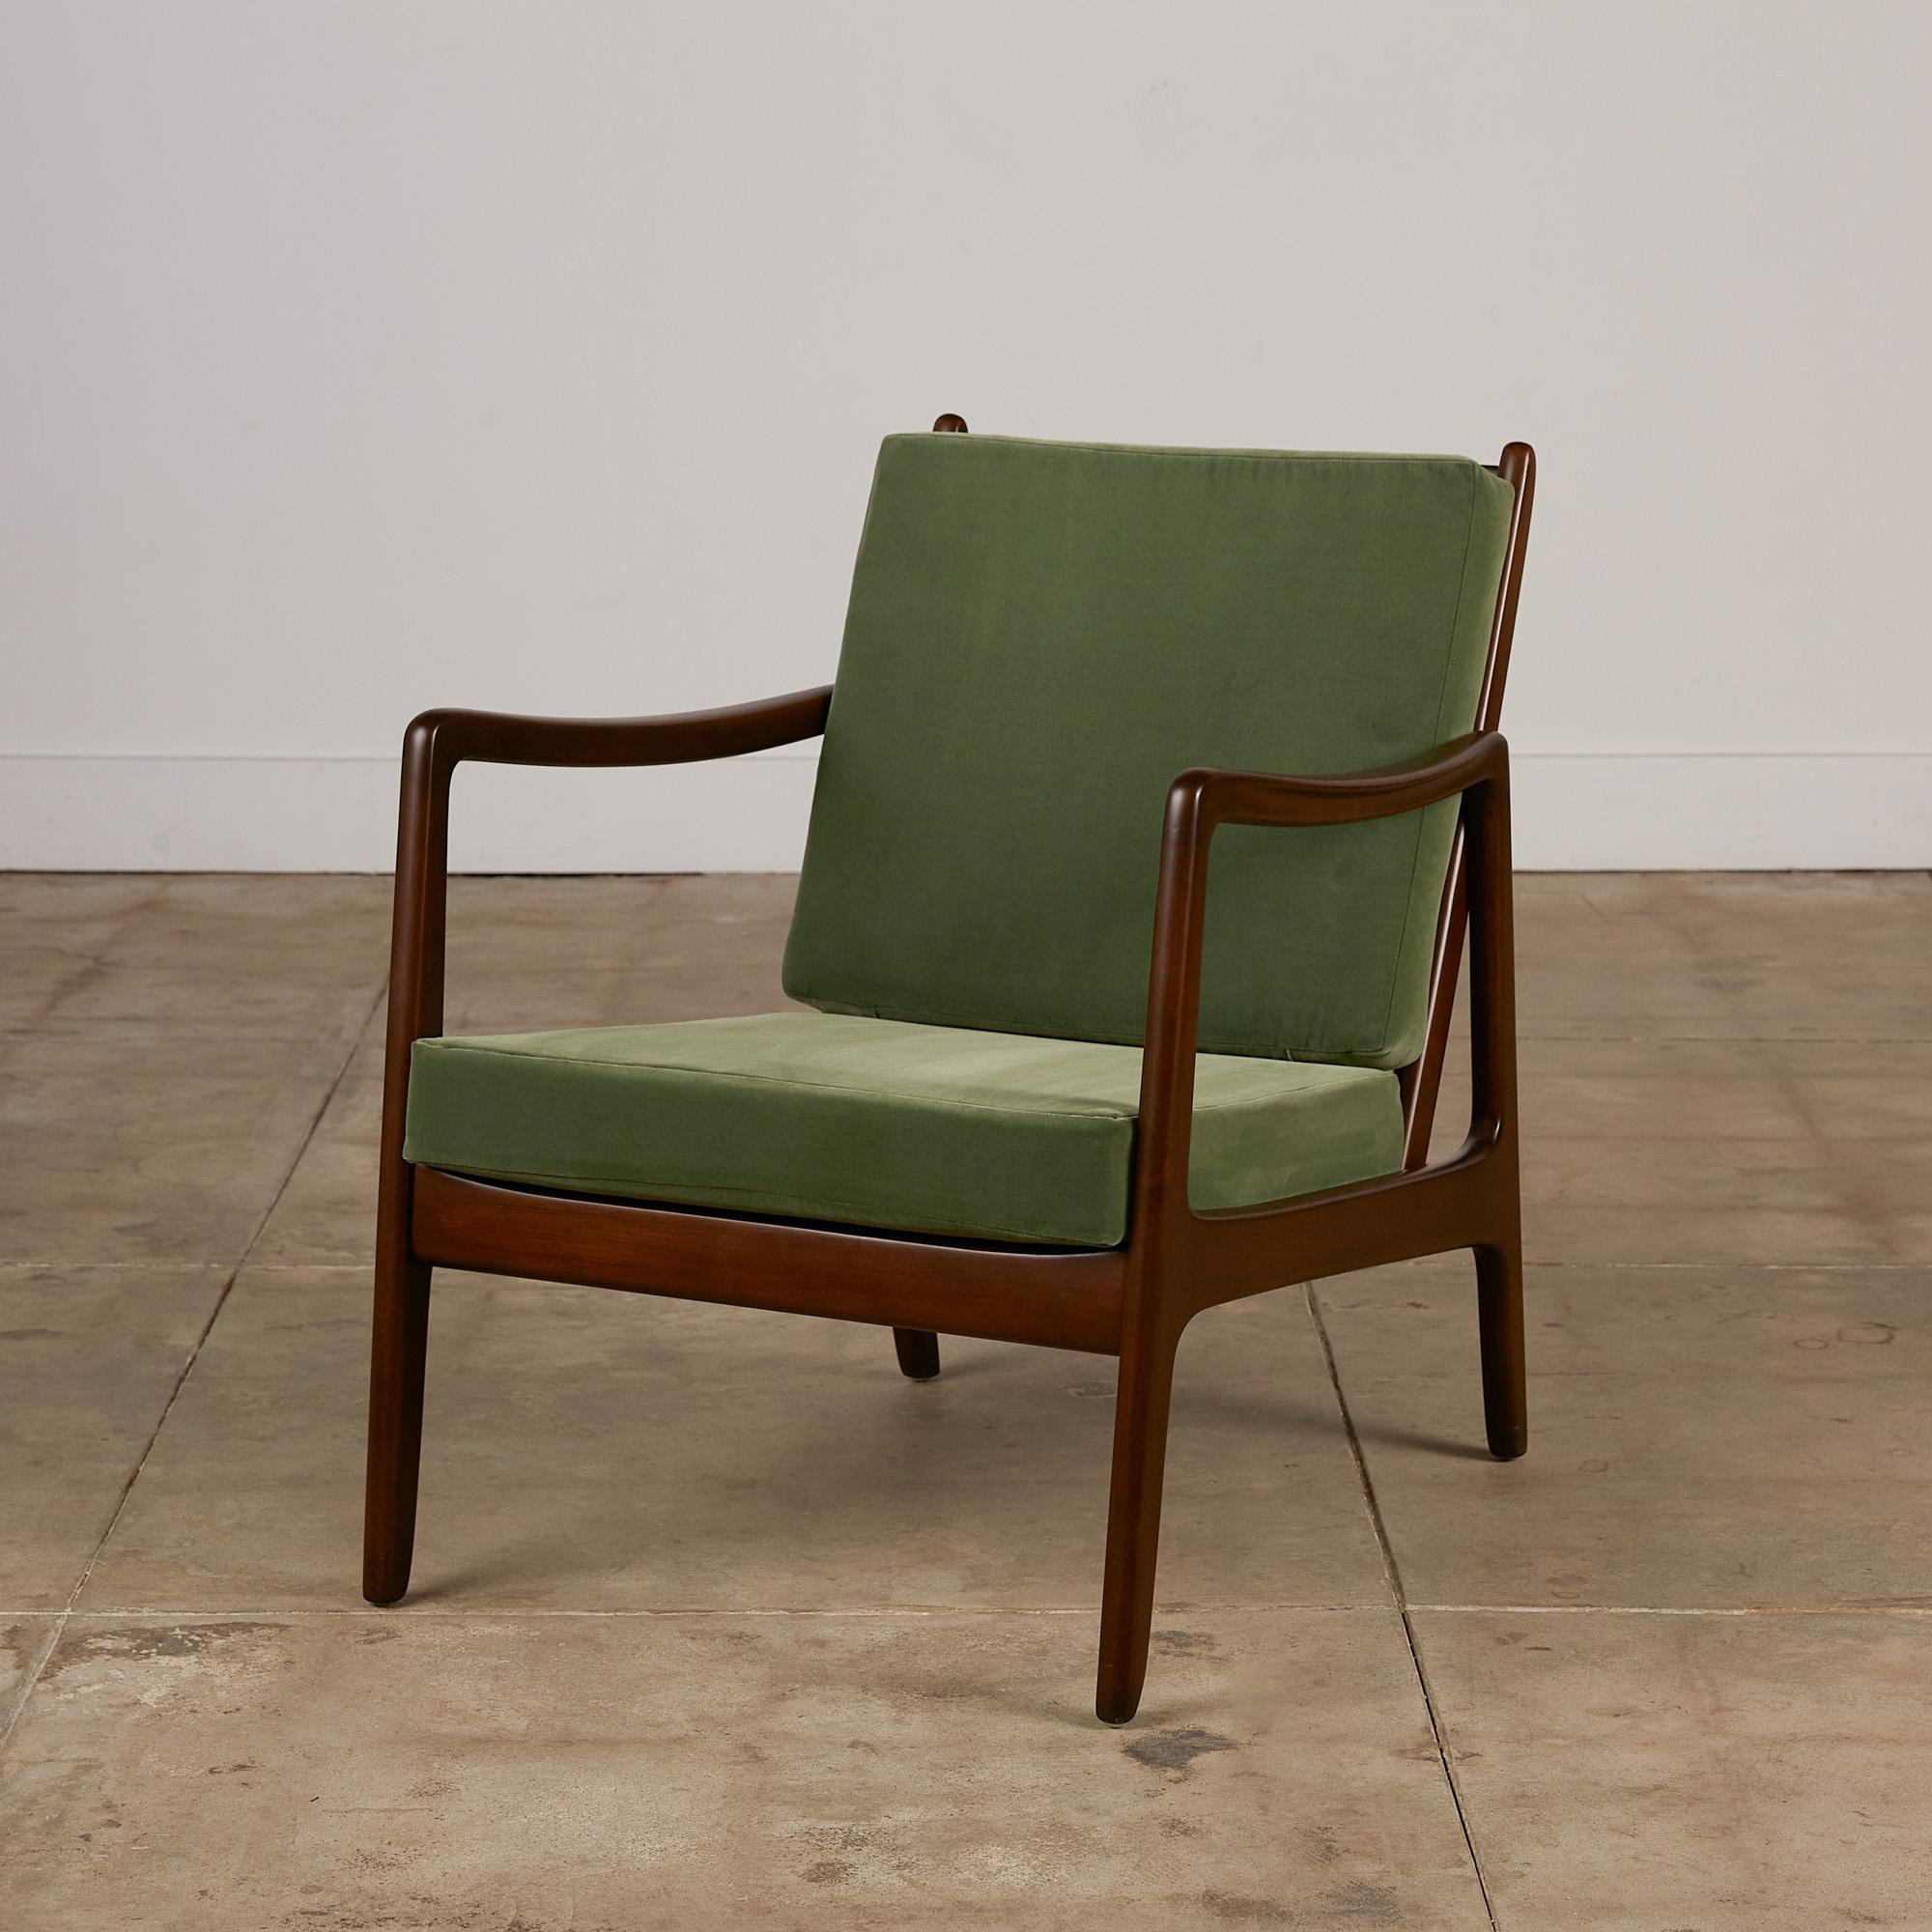 Danish modern “166” lounge chair by Ole Wanscher for France & Søn, circa 1951. The lounge chair features a sculpted teak frame and slatted teak back support with new green Italian cotton velvet cushions.

Ole Wanscher was a Danish furniture